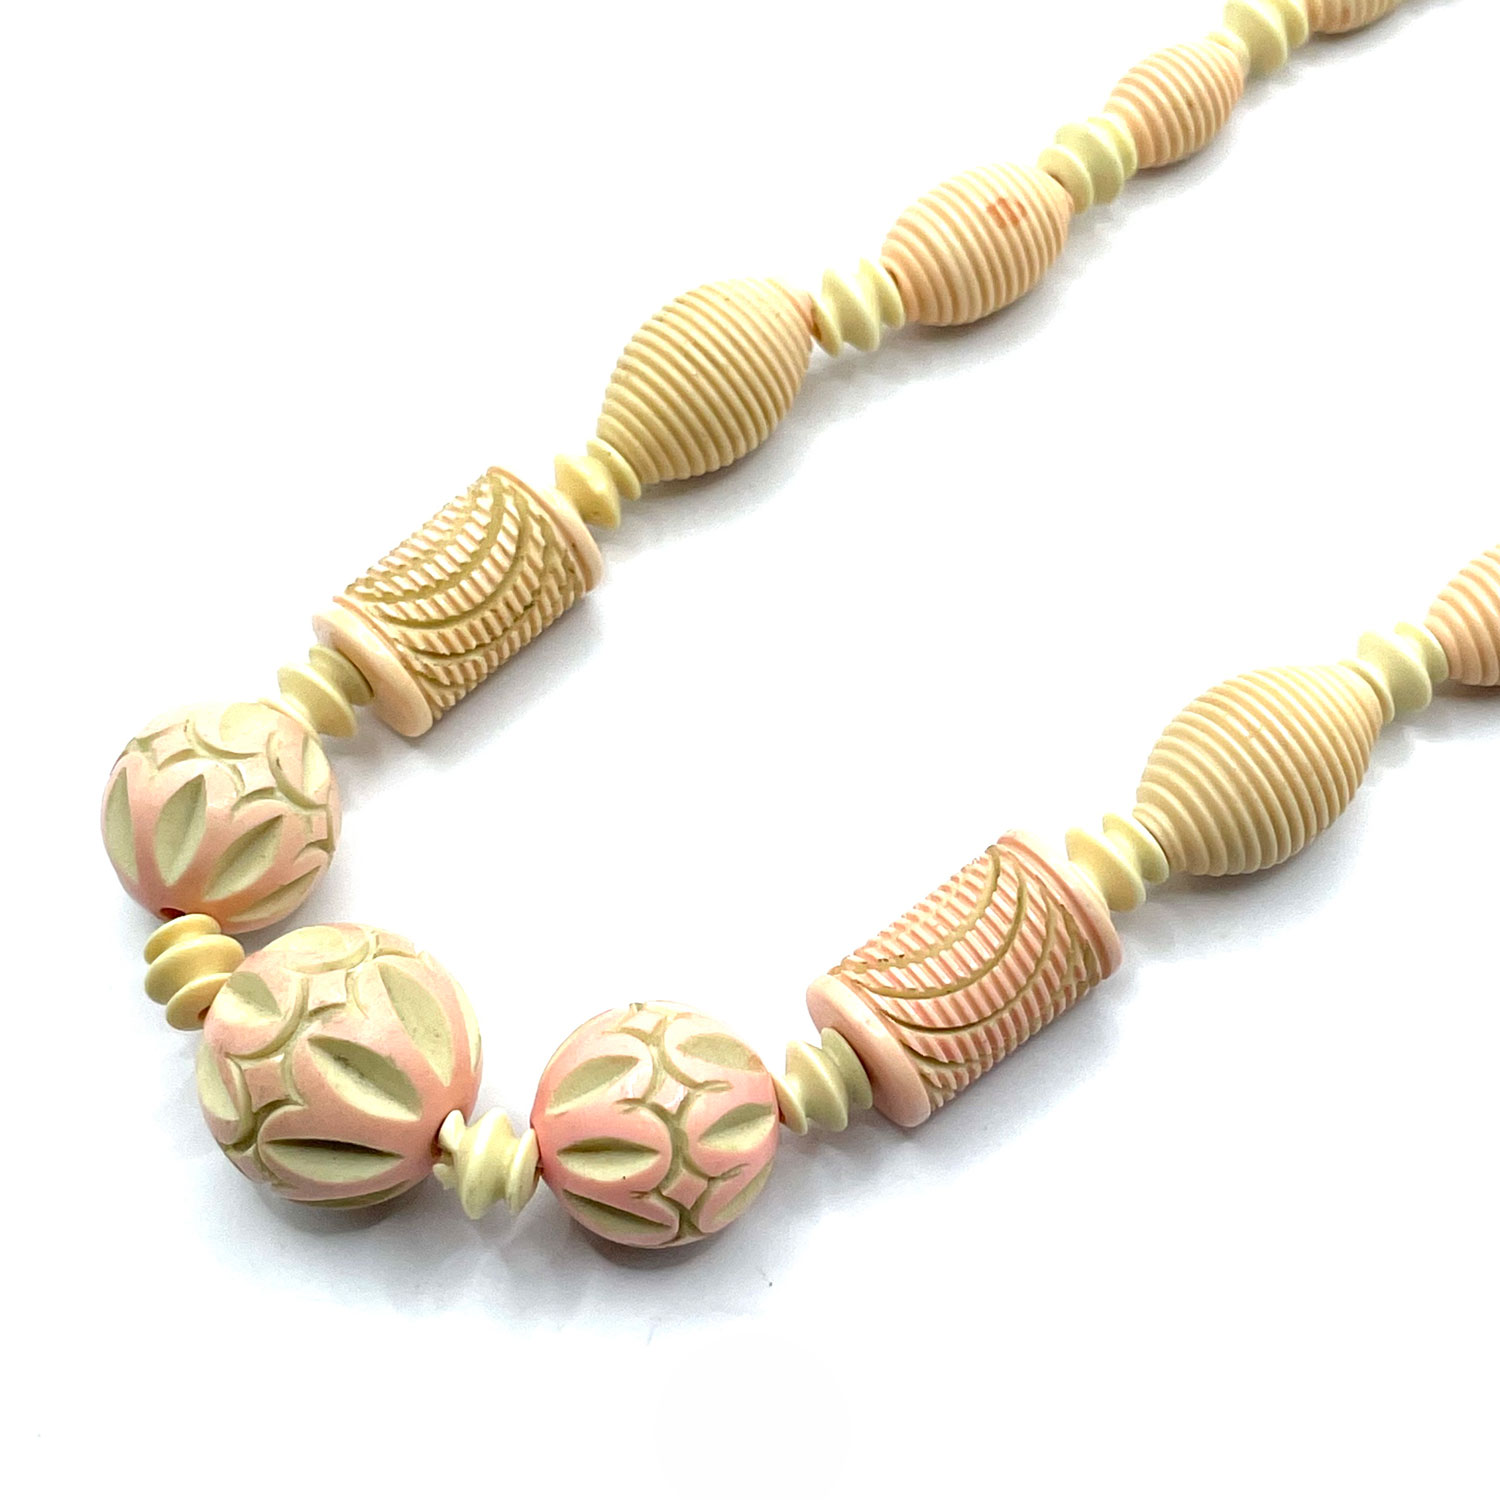 1930s celluloid bead necklace